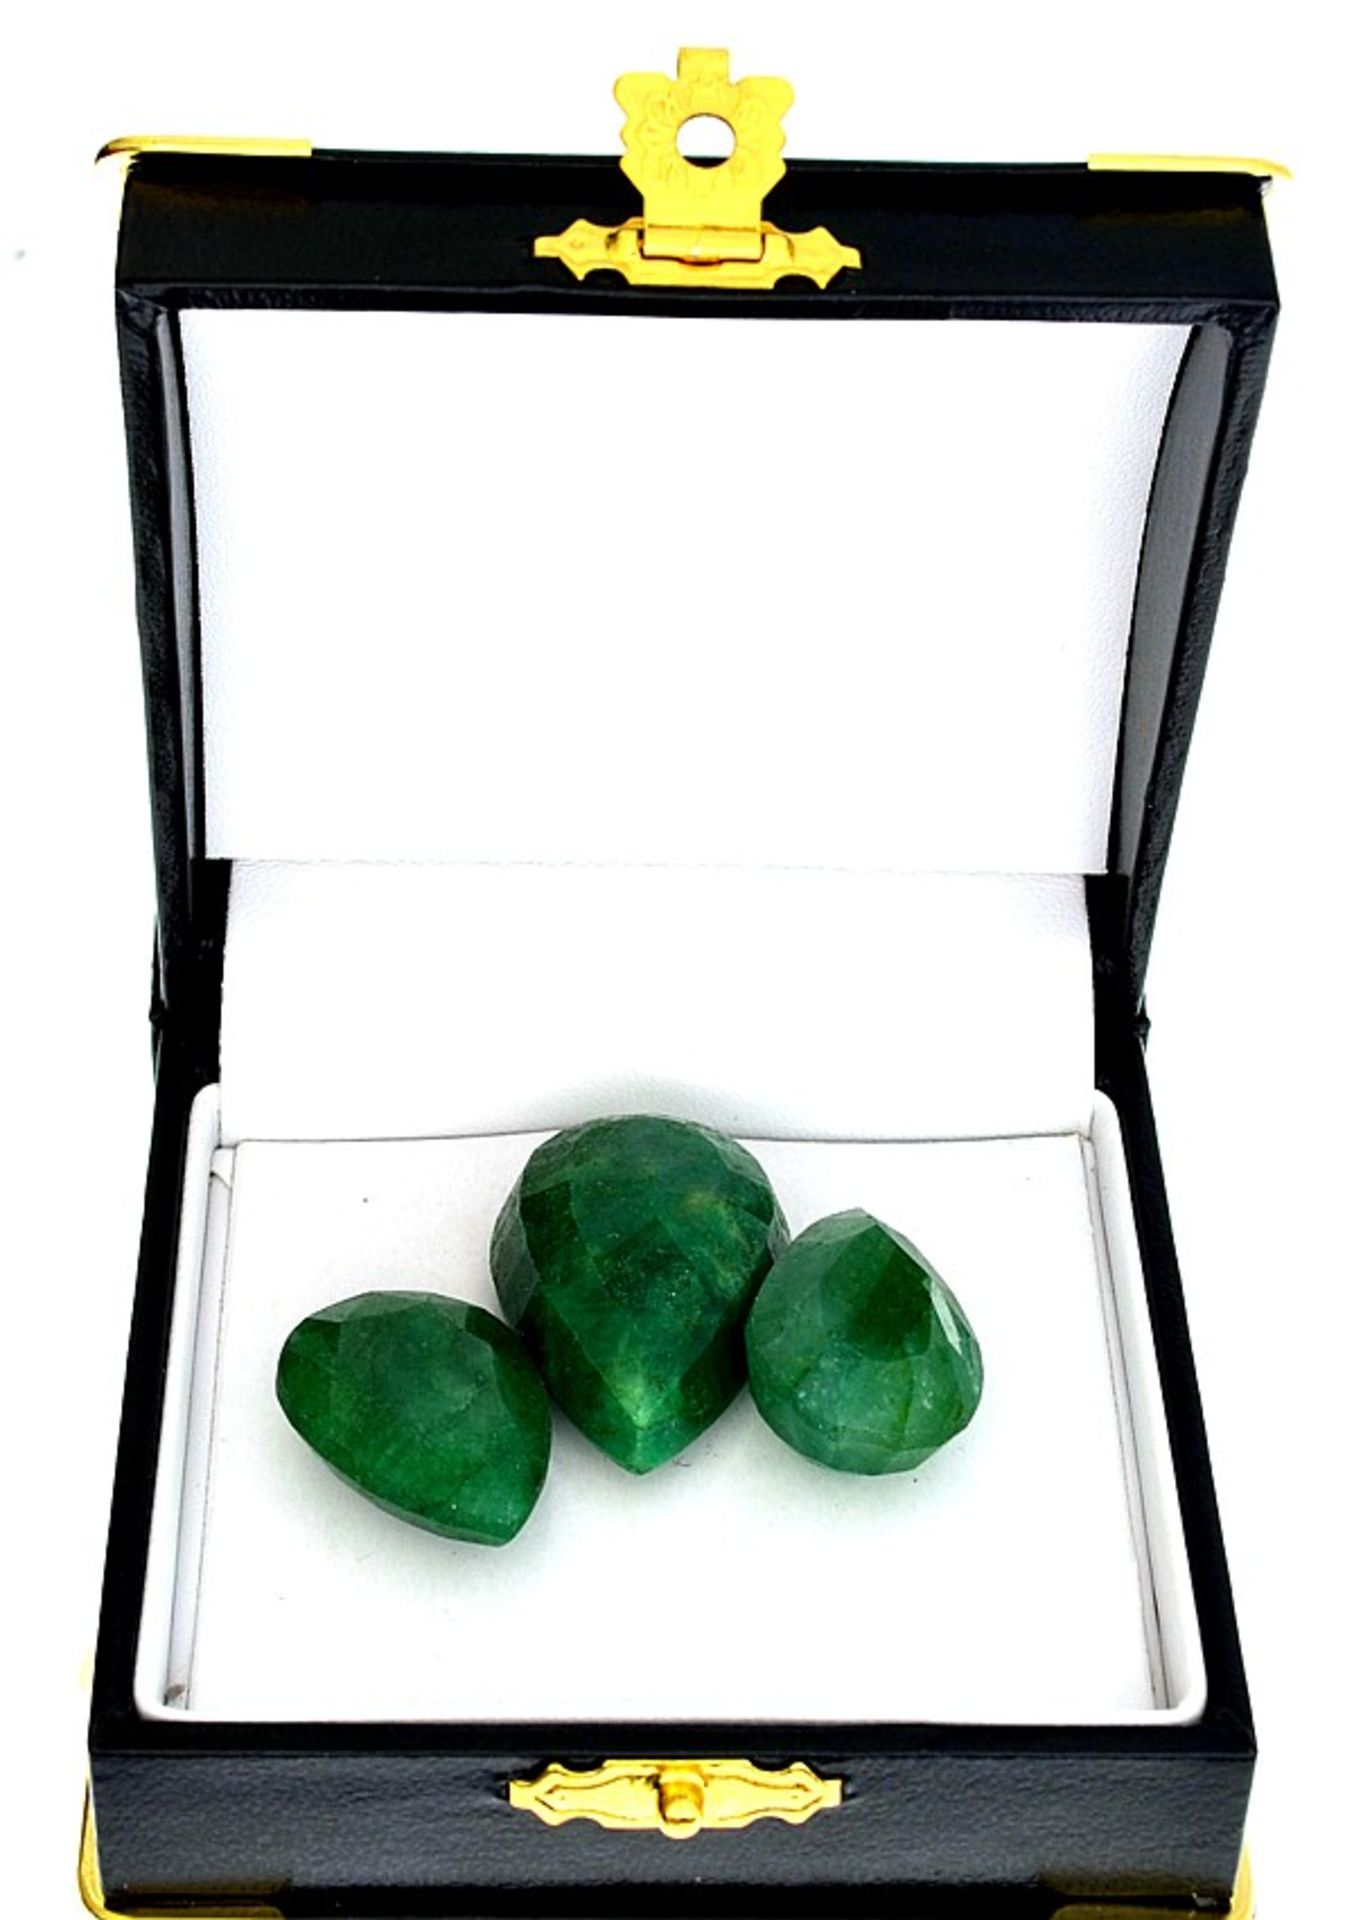 A collection of 3 x Pear Cut Green Beryl Gemstones = 90.61 carats. average measurements 3.00cm x 2.